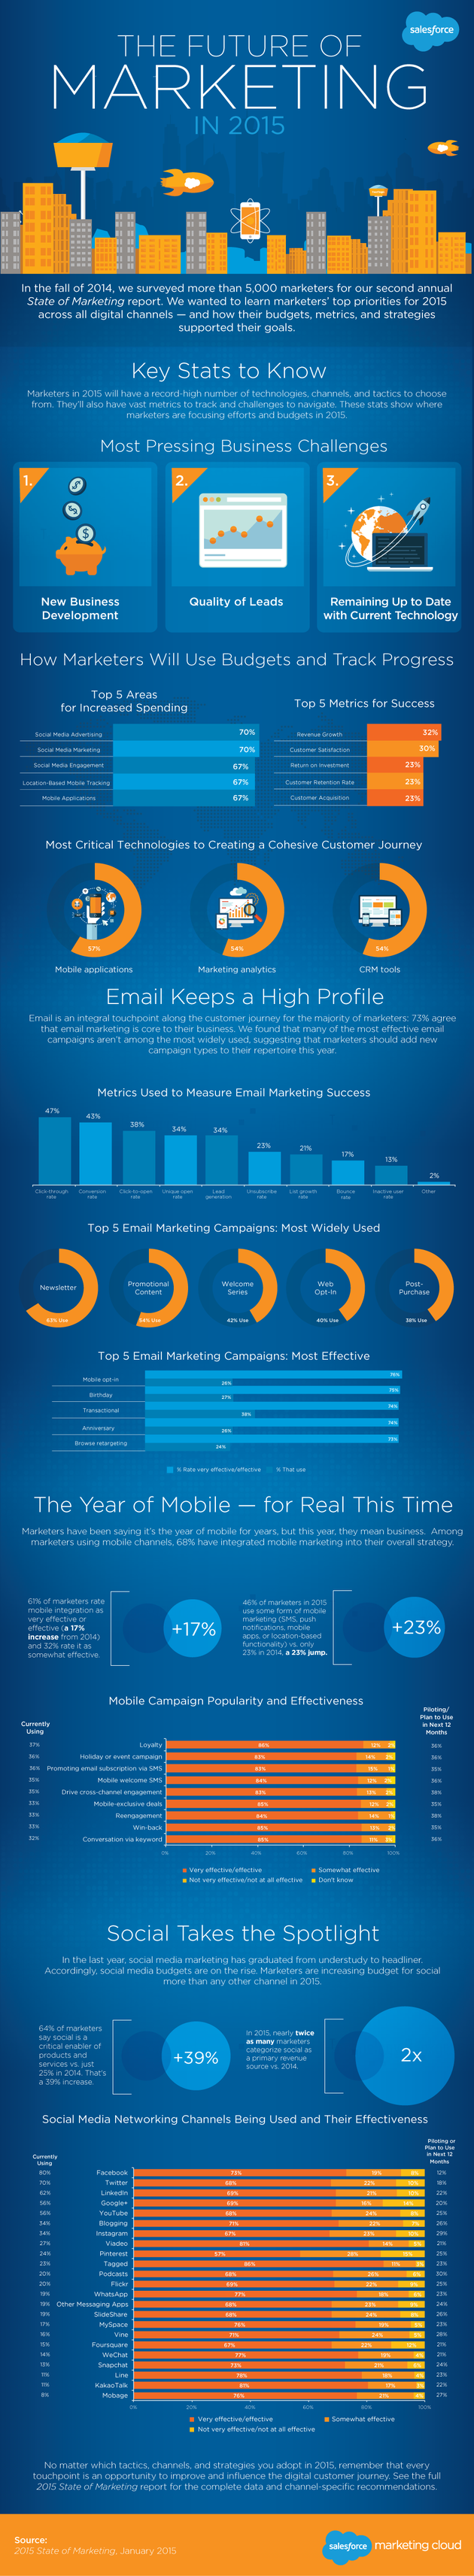 state-of-marketing-infographic